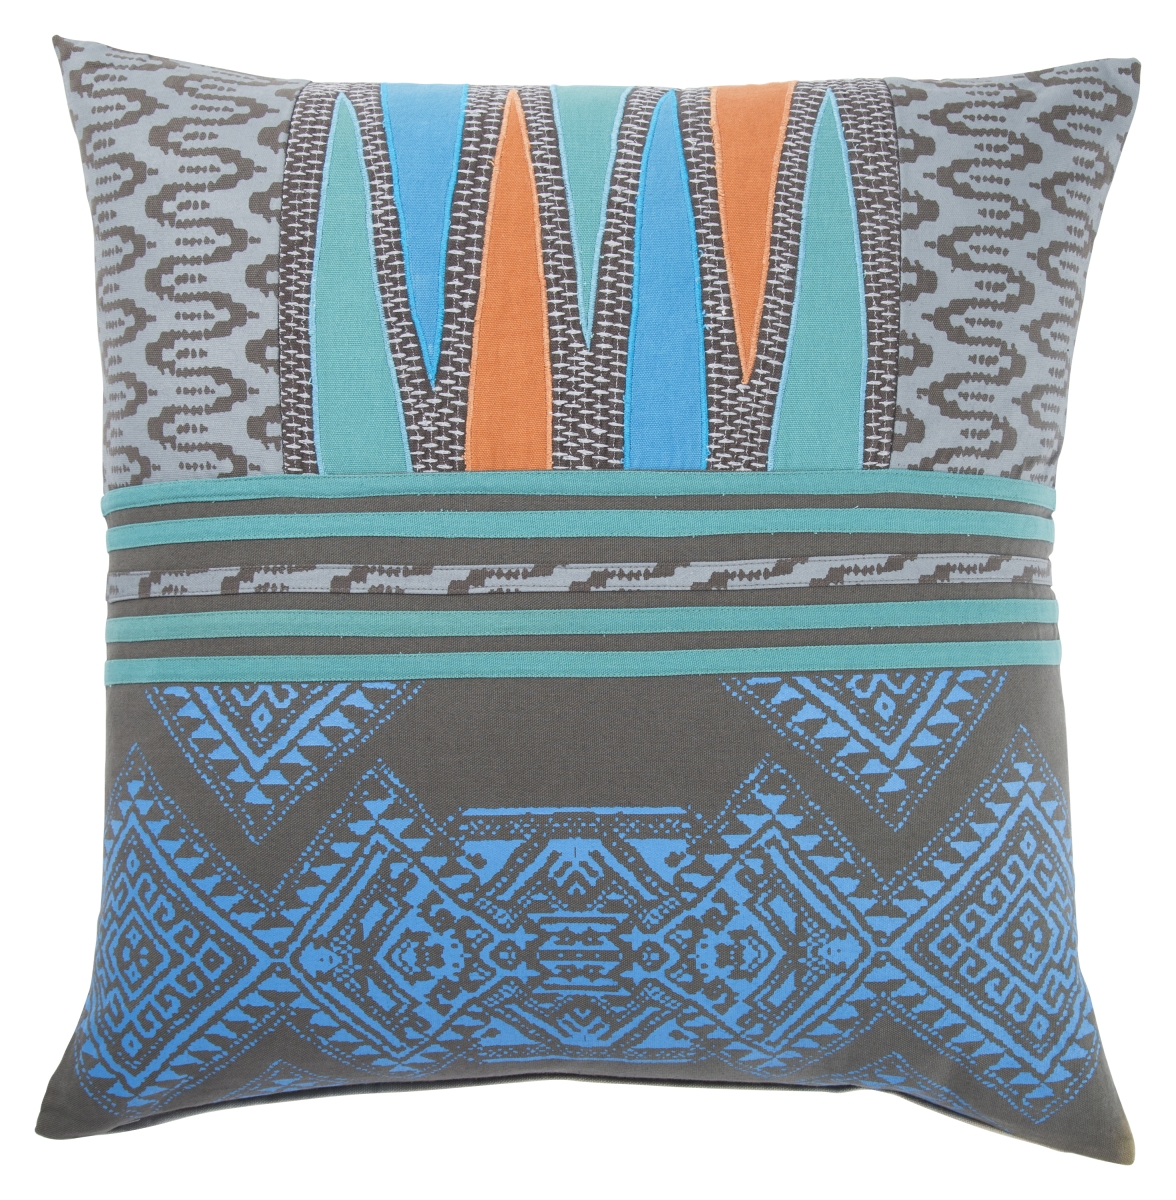 Plw102160 22 X 22 In. Traditions Made Modern Pillows Museum Ifa Mesa Gray & Aqua Geometric Poly Throw Pillow